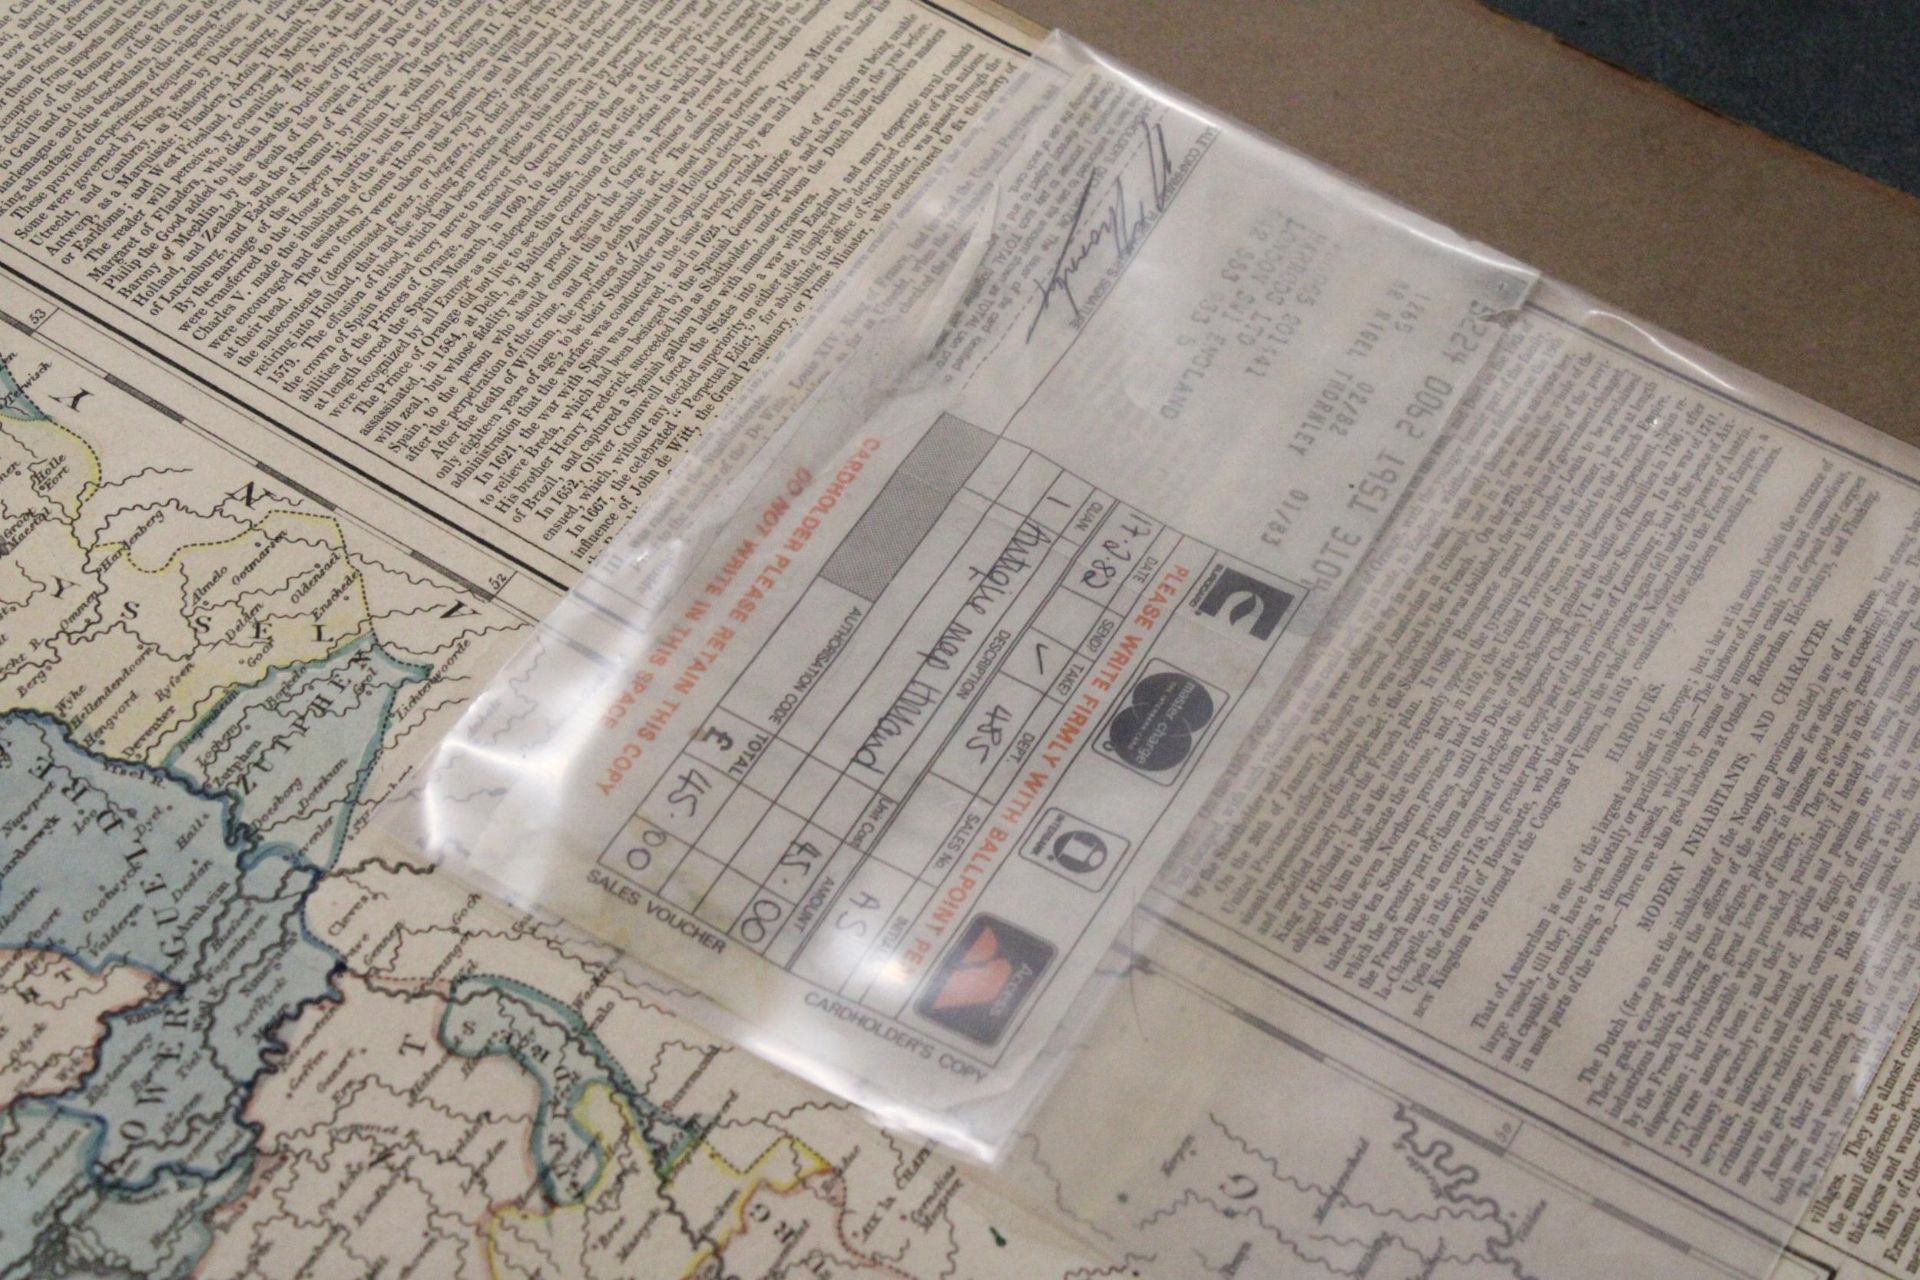 AN ANTIQUE MAP OF THE NETHERLANDS, BOUGHT FROM HARRODS IN 1982, WITH RECEIPT FOR PURCHASE PRICE - Image 3 of 4